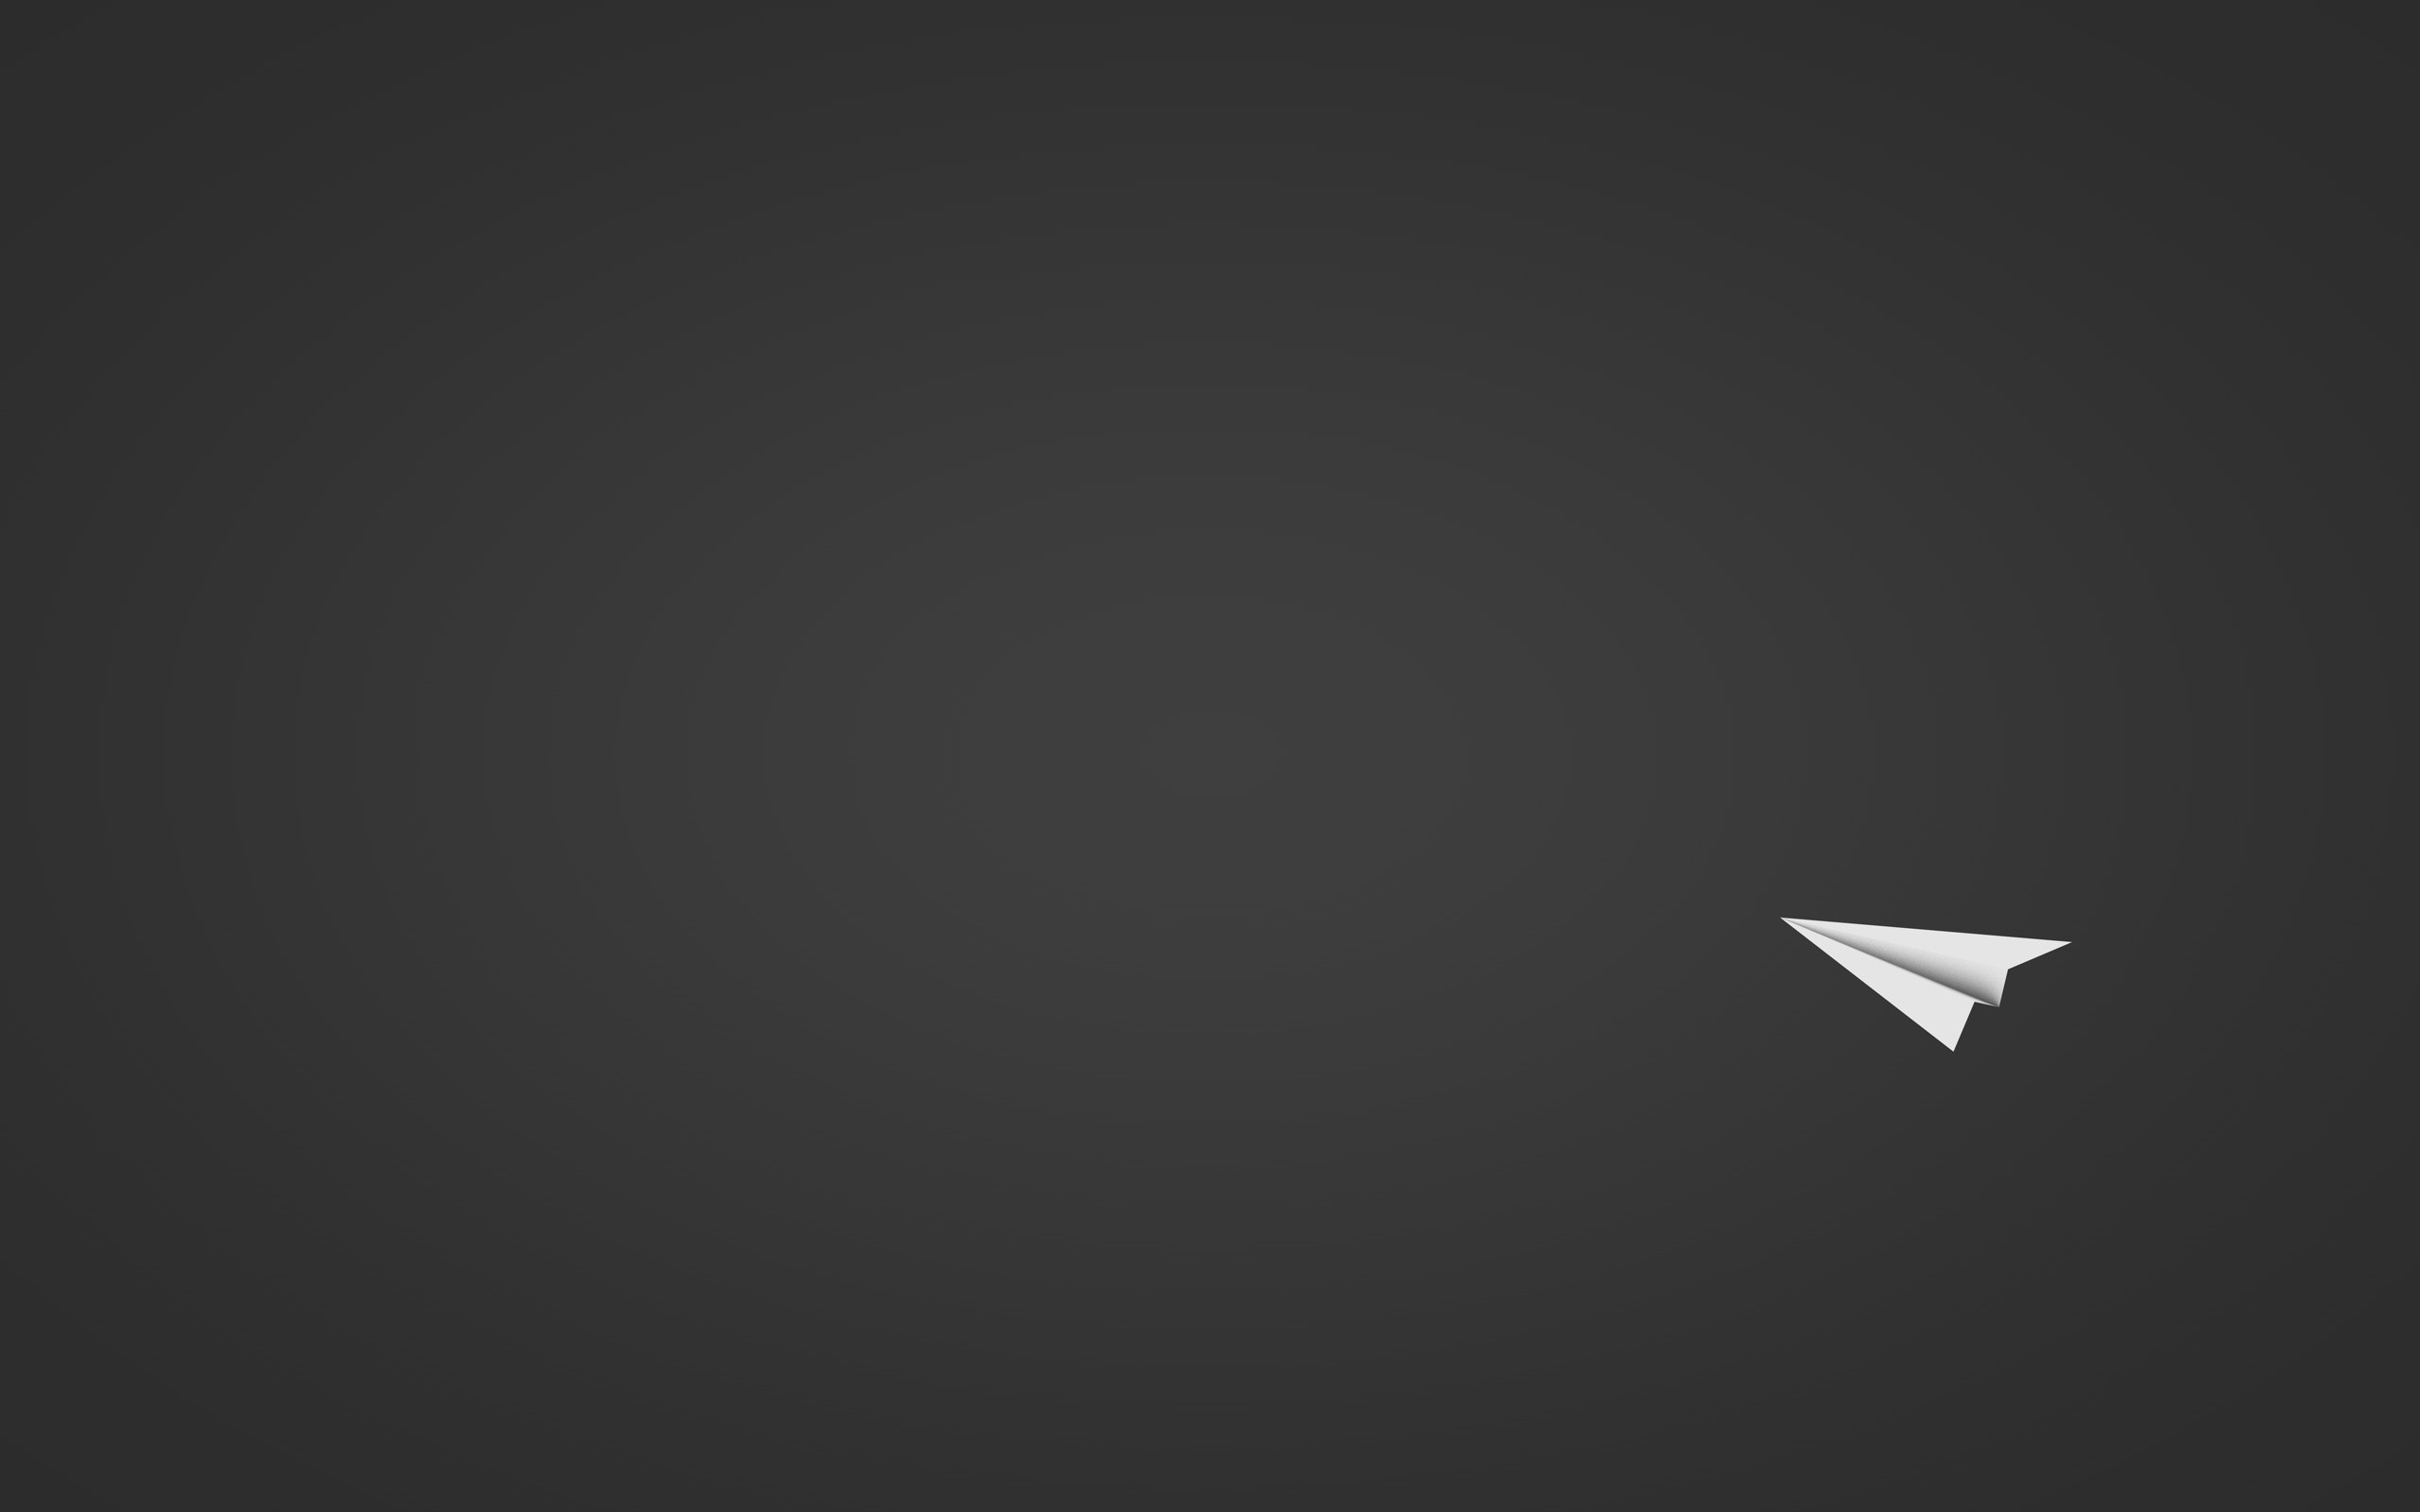 General 2560x1600 paperplanes minimalism simple background gray background